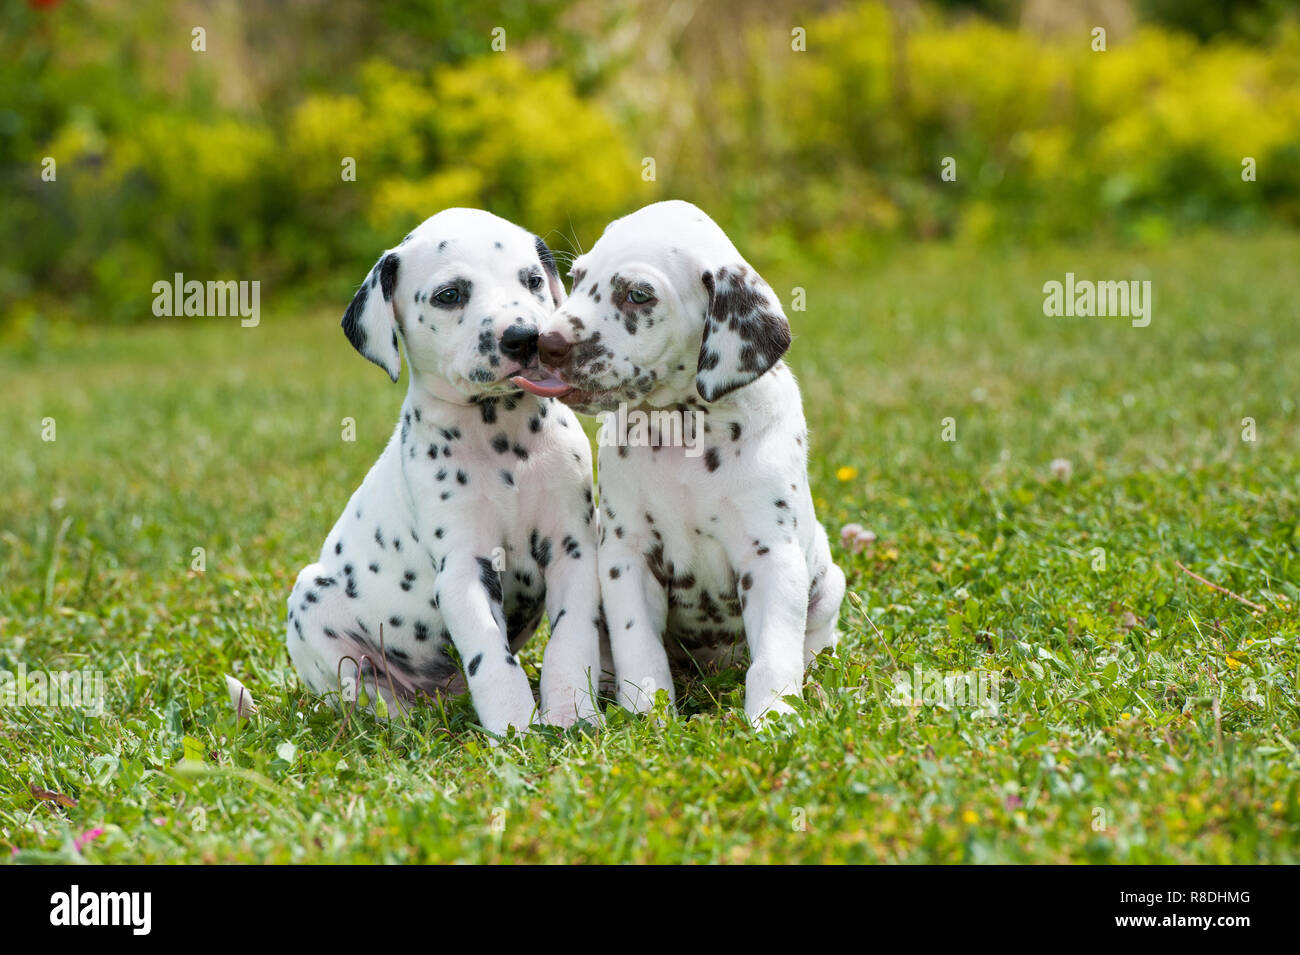 Two dalmatian puppies sitting in a meadow Stock Photo